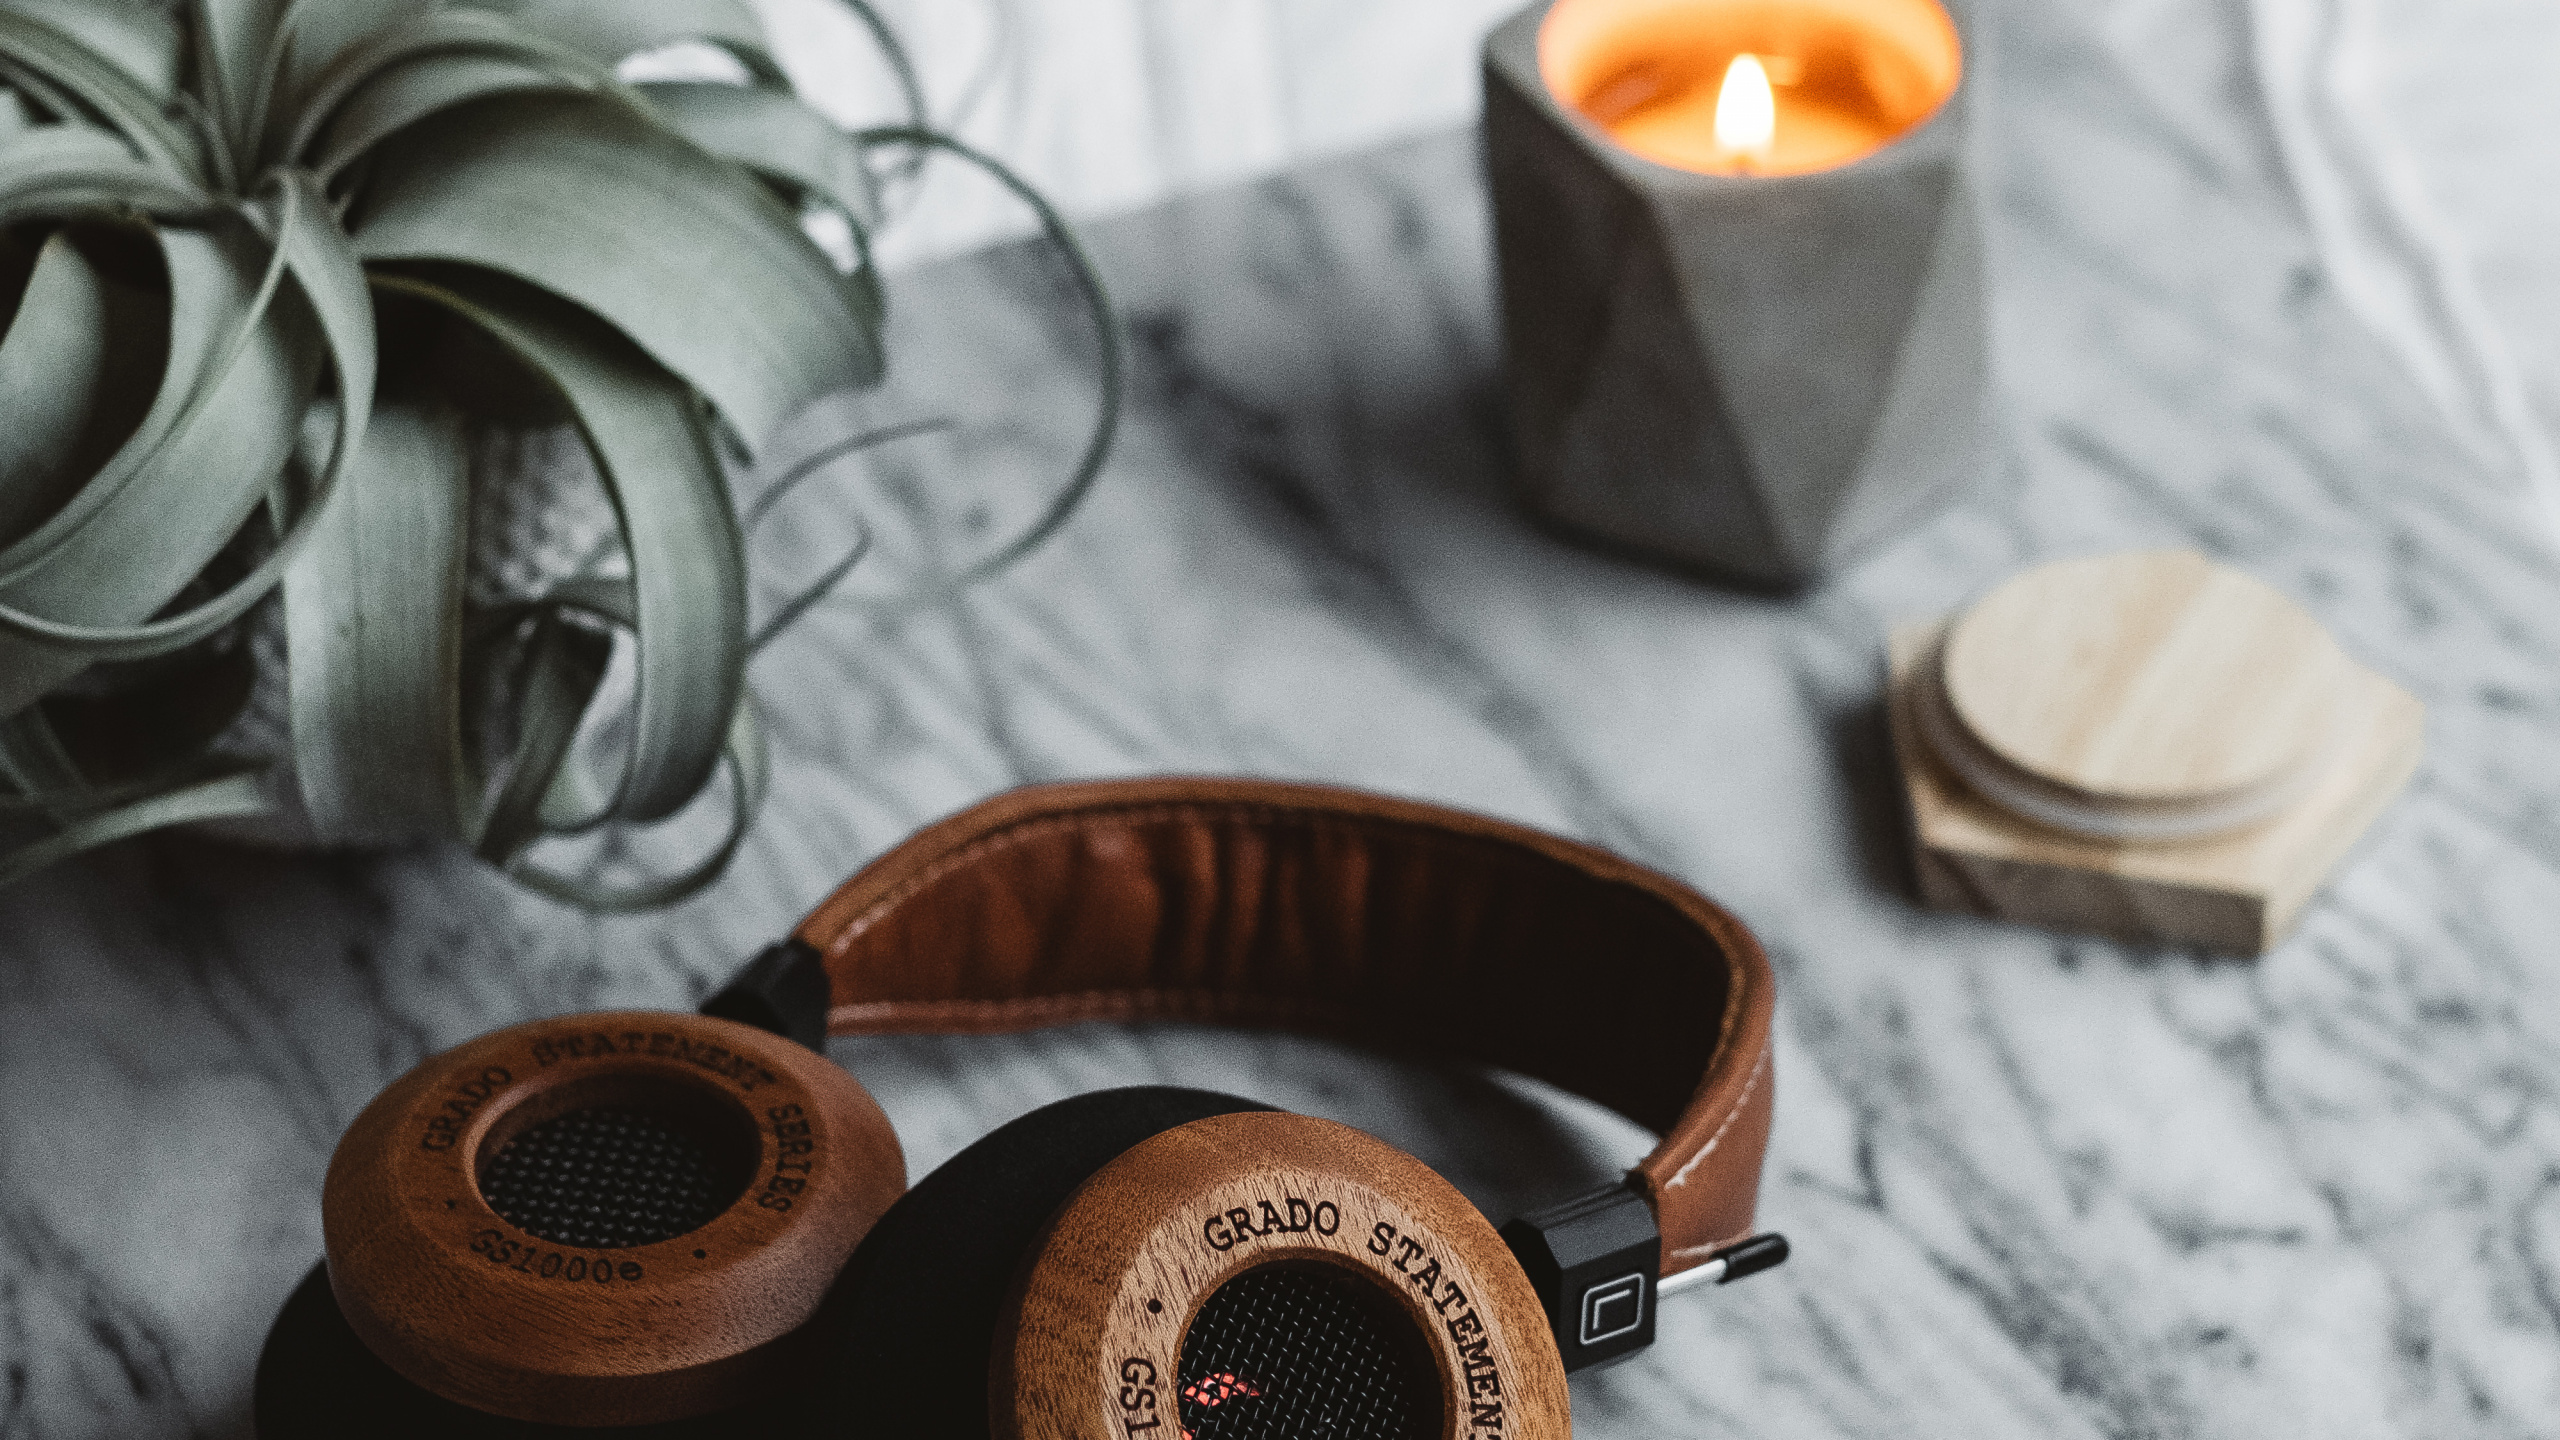 Microphone, Headphones, Wood, Table, Coffee Cup. Wallpaper in 2560x1440 Resolution